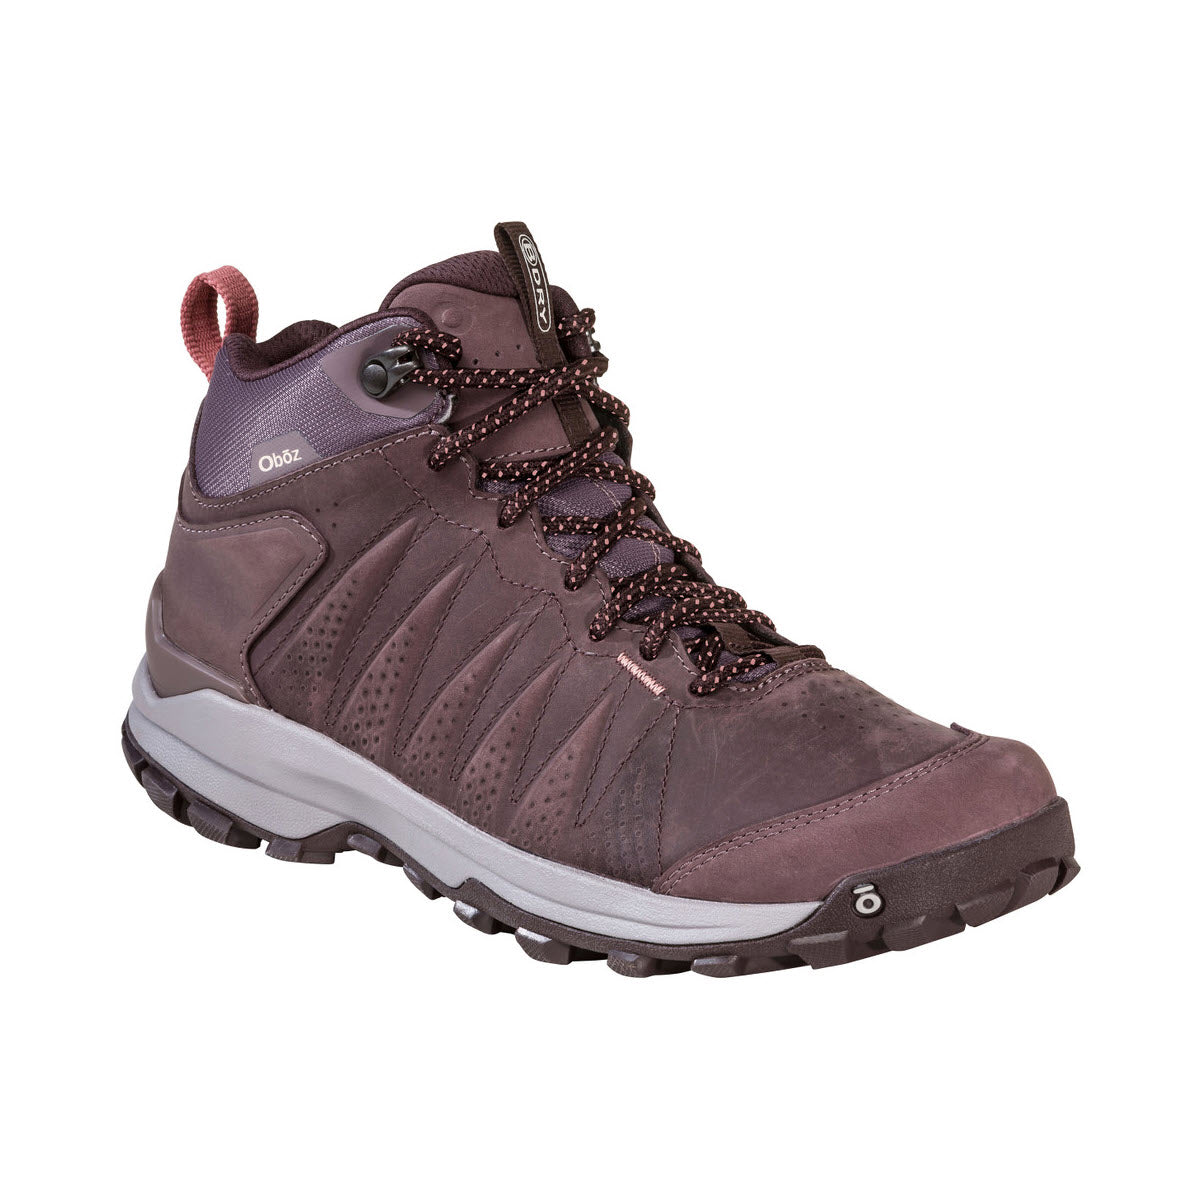 A brown Oboz Sypes Mid Leather hiking boot with purple accents and reinforced ankle support, featuring a rugged Bend Outsole and lace-up closure.